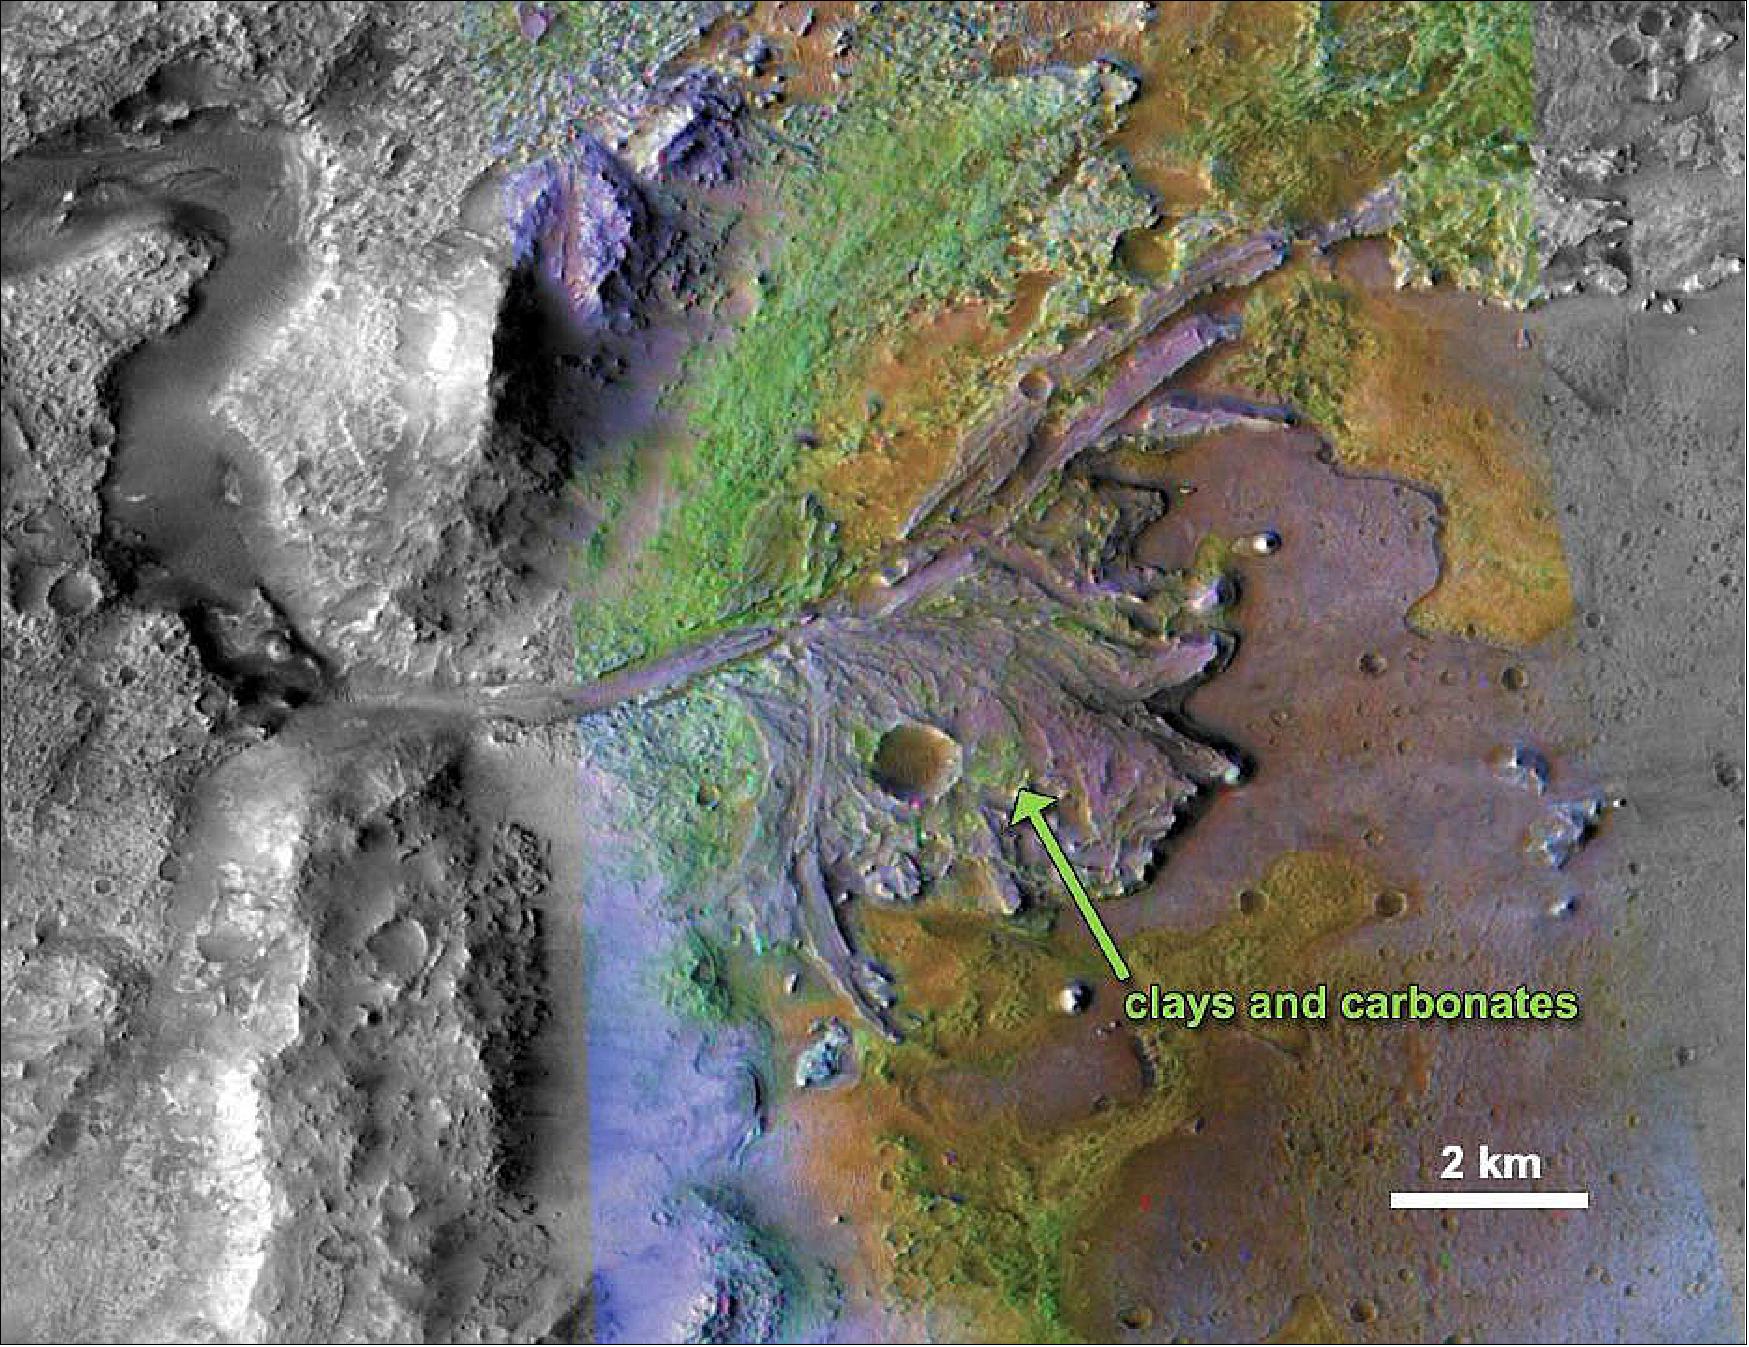 Figure 15: Chemical Alteration by Water, Jezero Crater Delta: On ancient Mars, water carved channels and transported sediments to form fans and deltas within lake basins (image credit: NASA/JPL-Caltech/MSSS/JHU-APL)